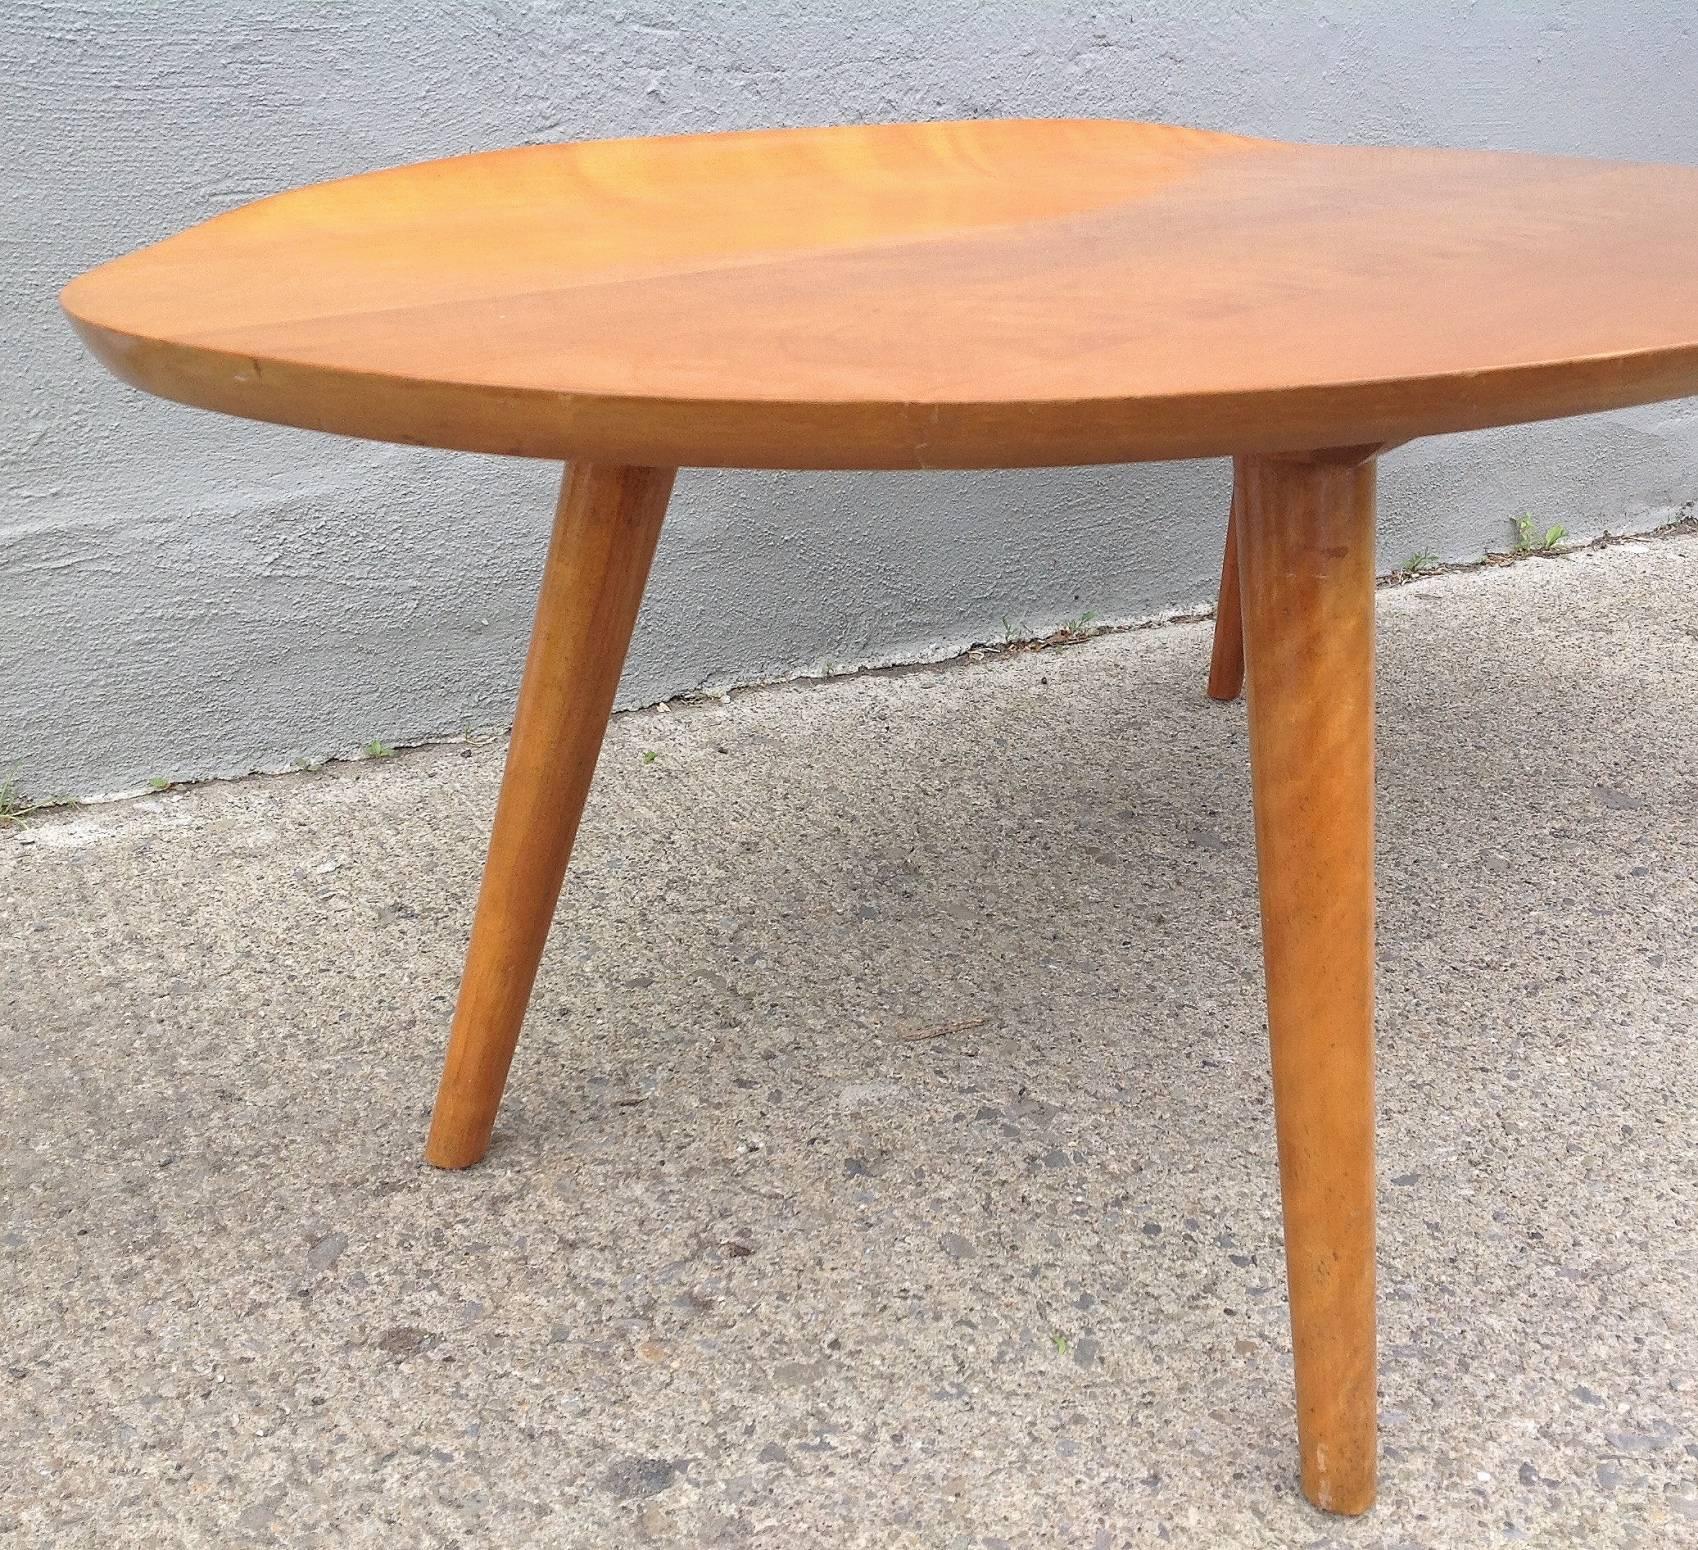 Russell Wright for Conant & Ball, circa 1950 honey maple table with dowel splayed legs. Warm patina, newly polished. Table surface 15.5"h. Age apprriate wear around feet.